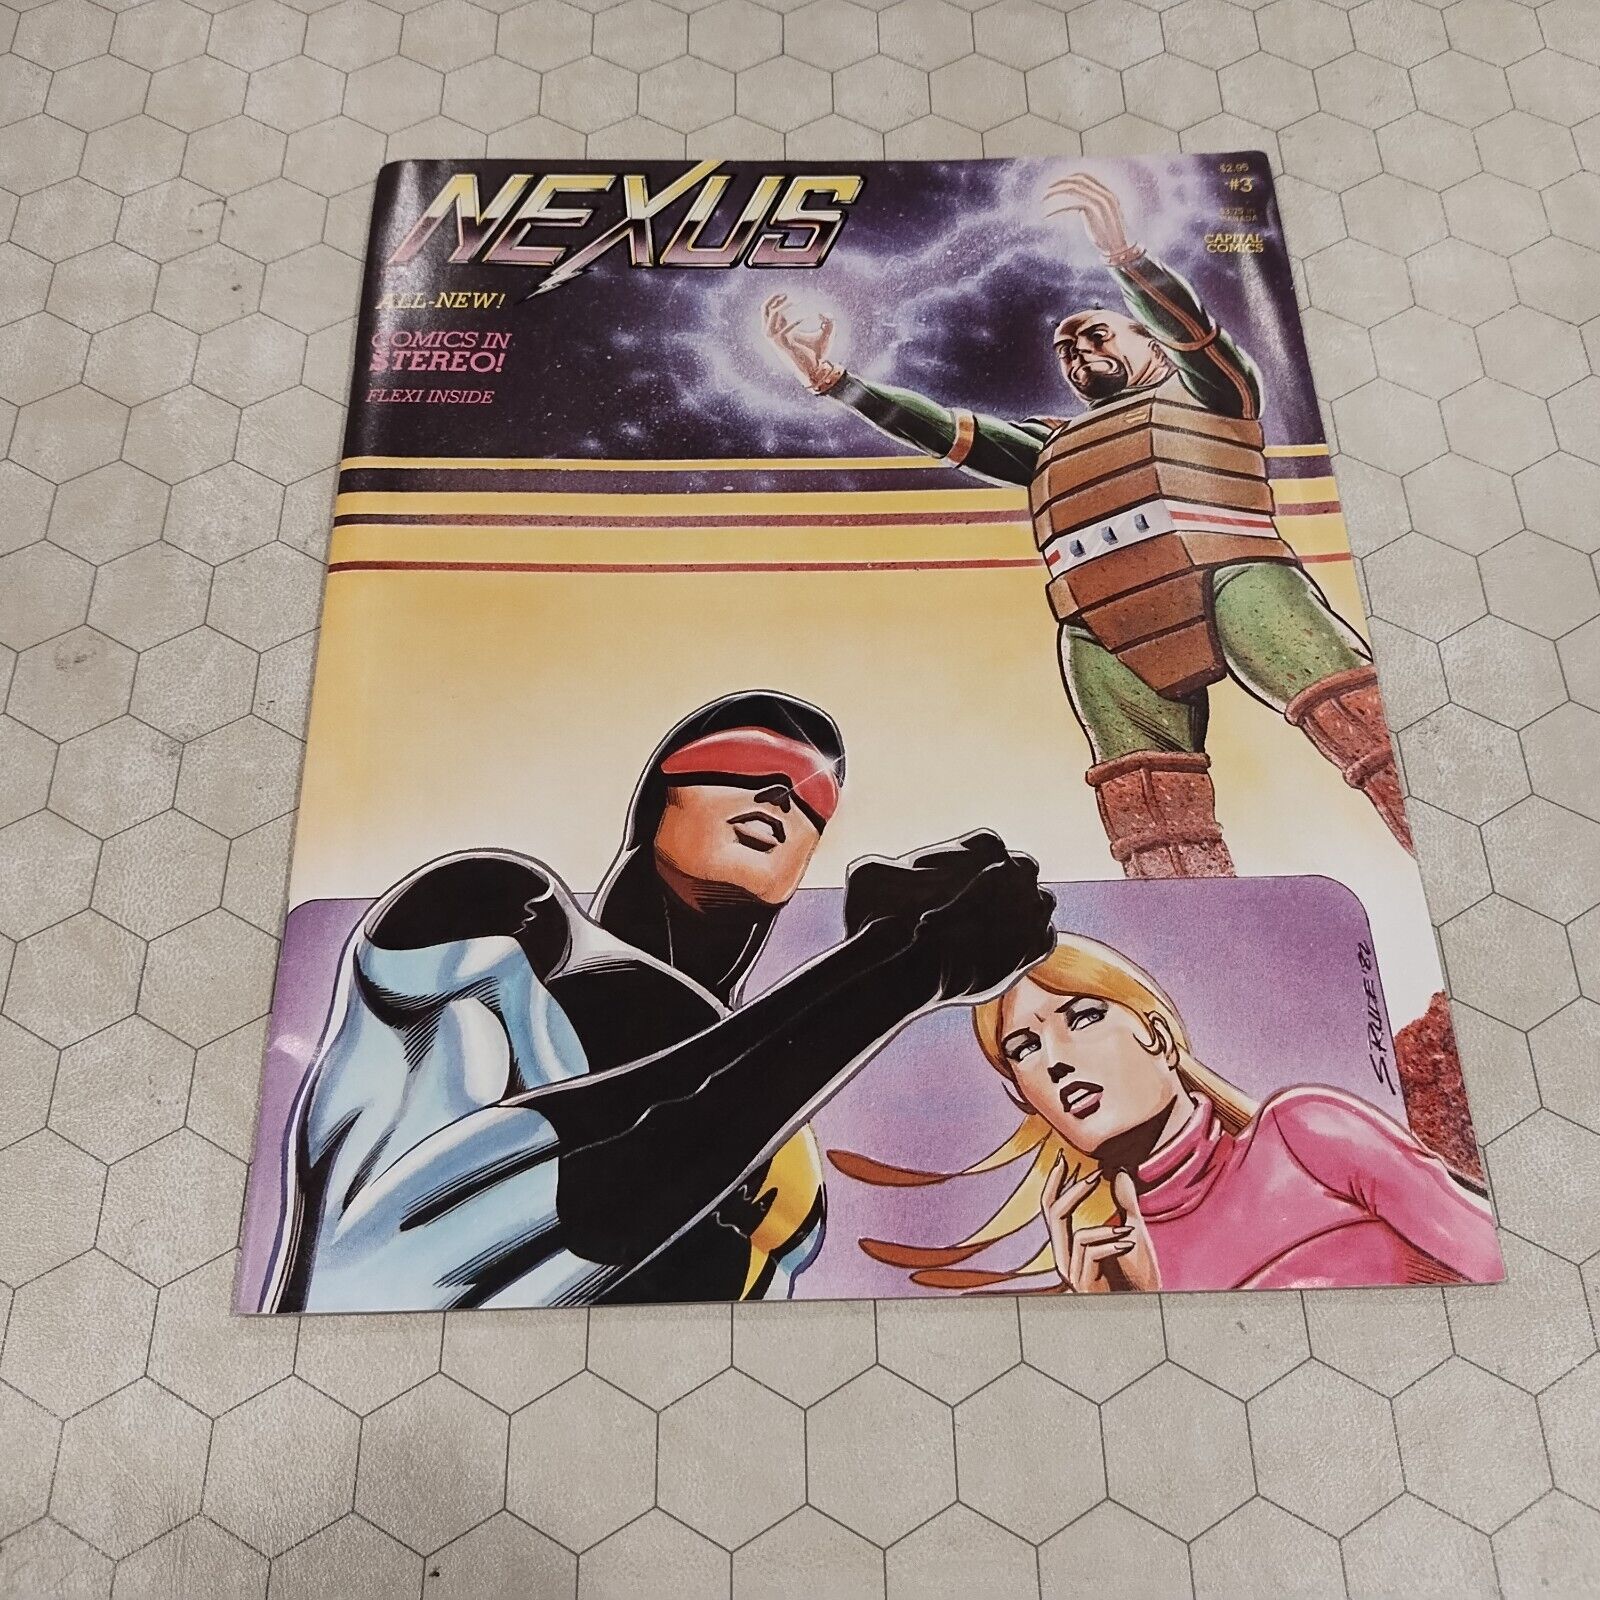 Nexus magazine #3, Capital graphic novel/TPB, 1982, includes attached record